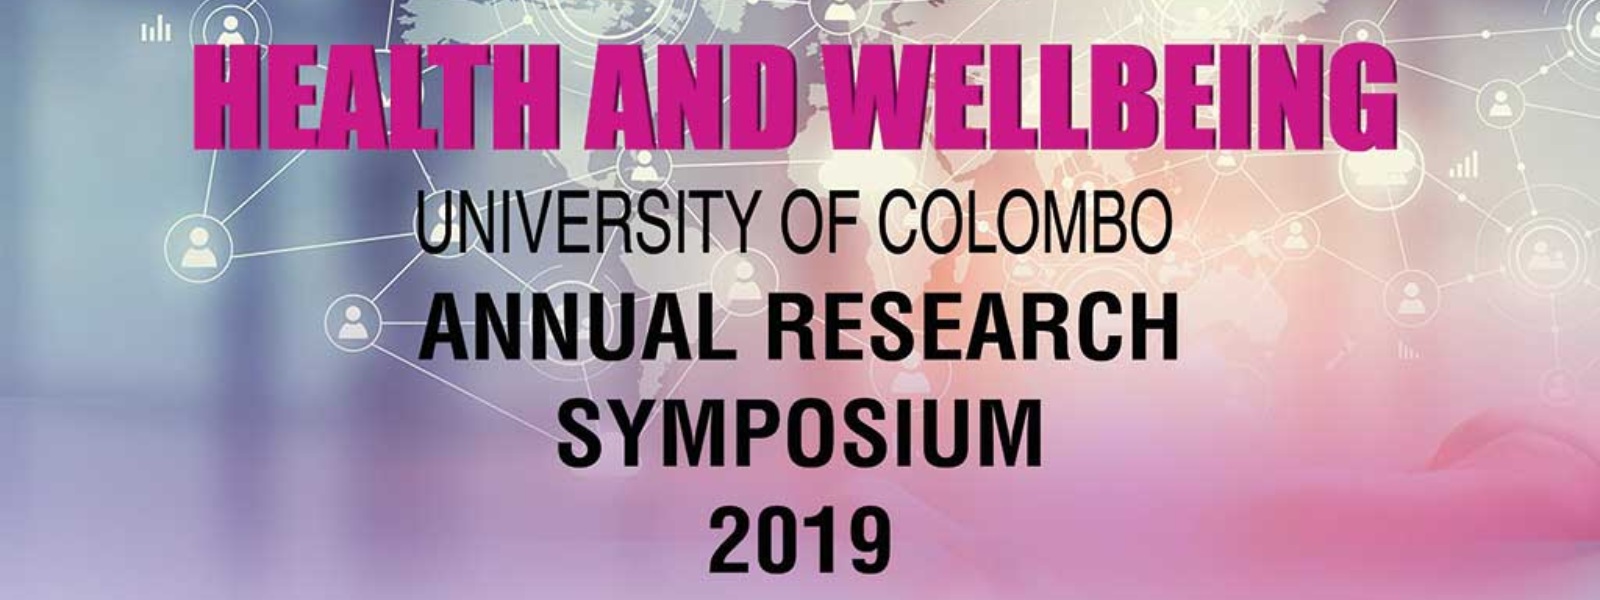 11th edition of Annual Research Symposium begins